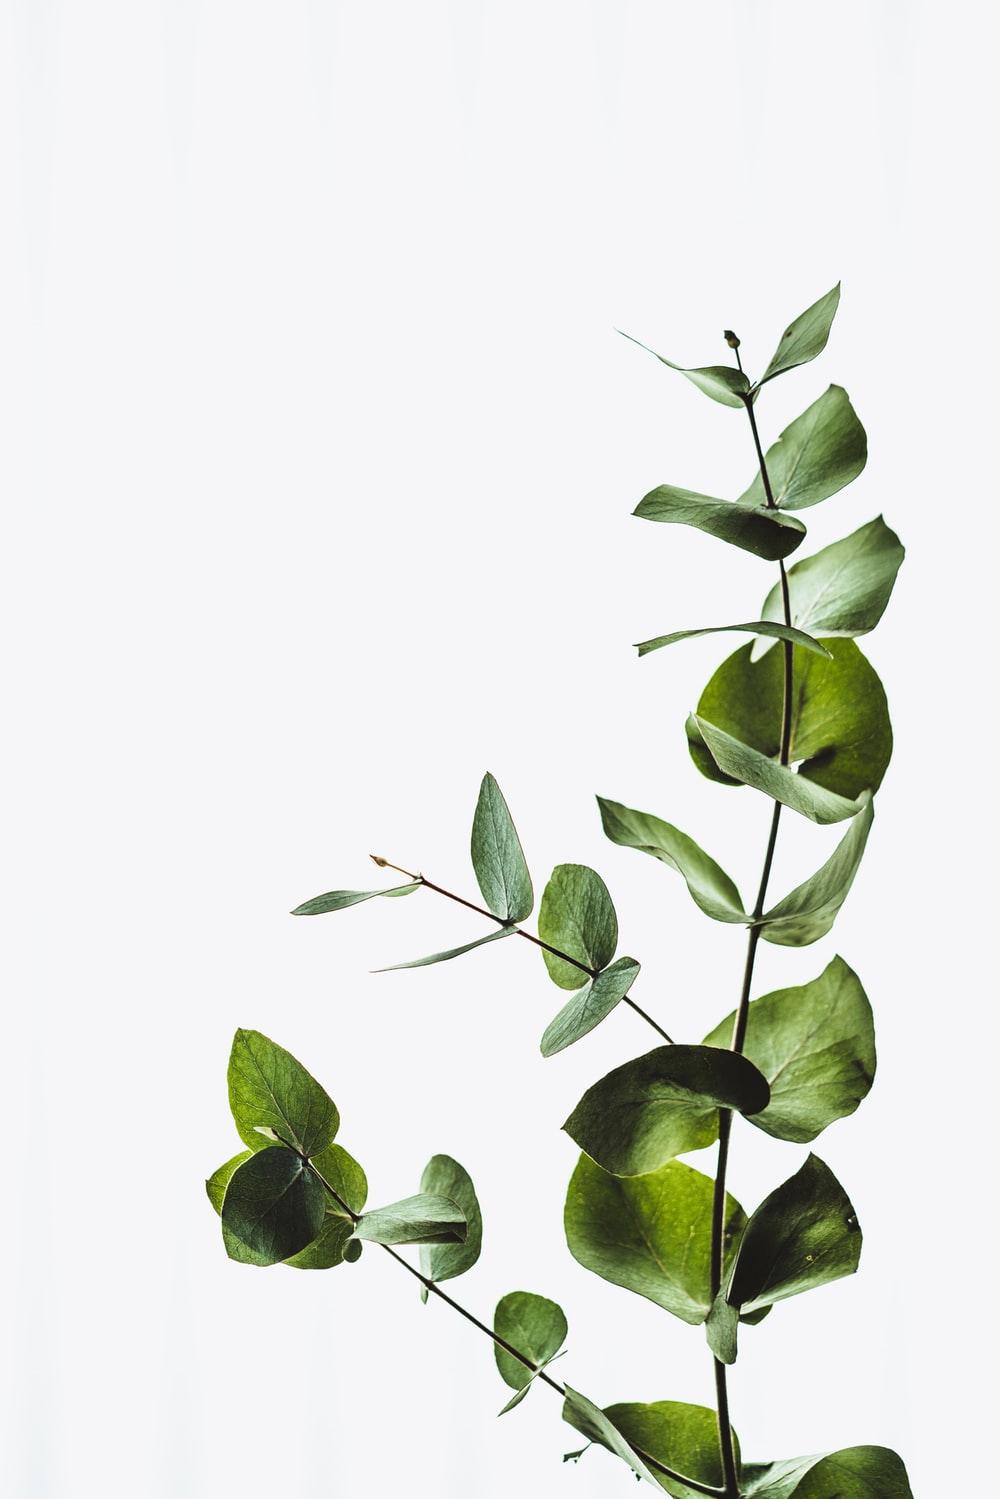 Plant Picture. Download Free Image